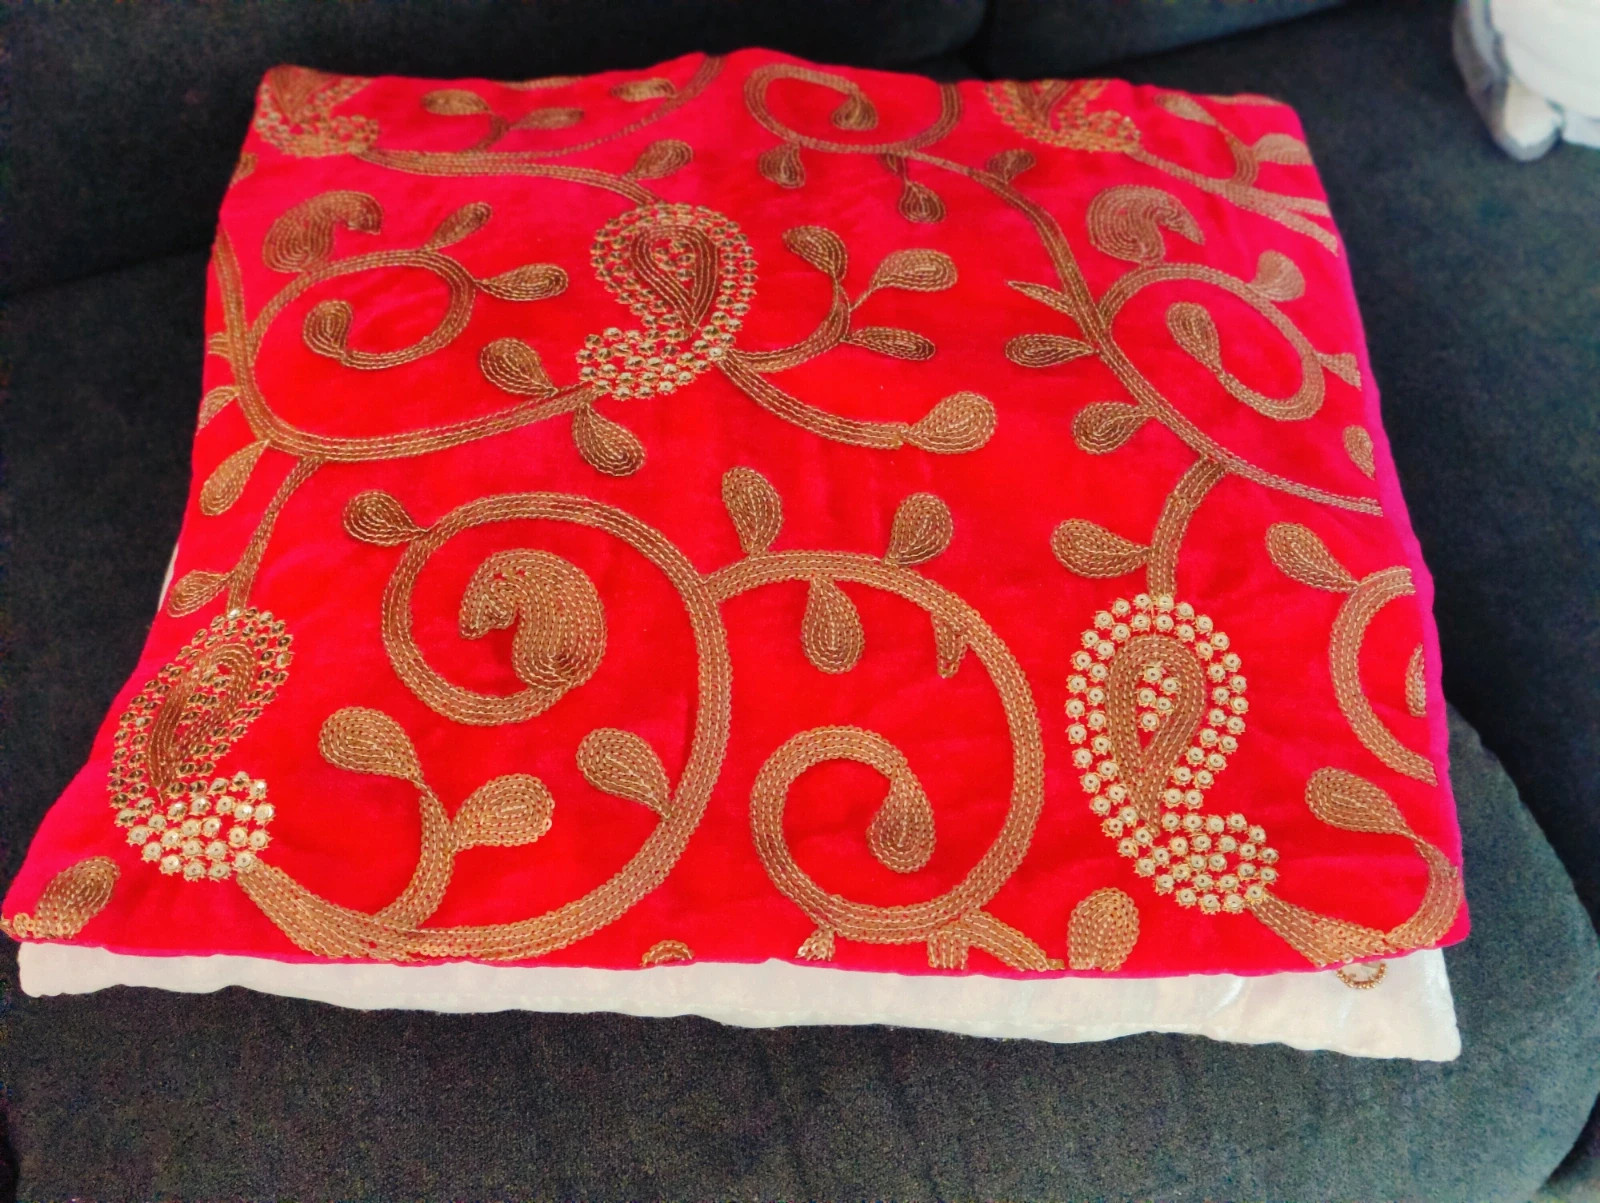 Pink cushion covers with beautiful design